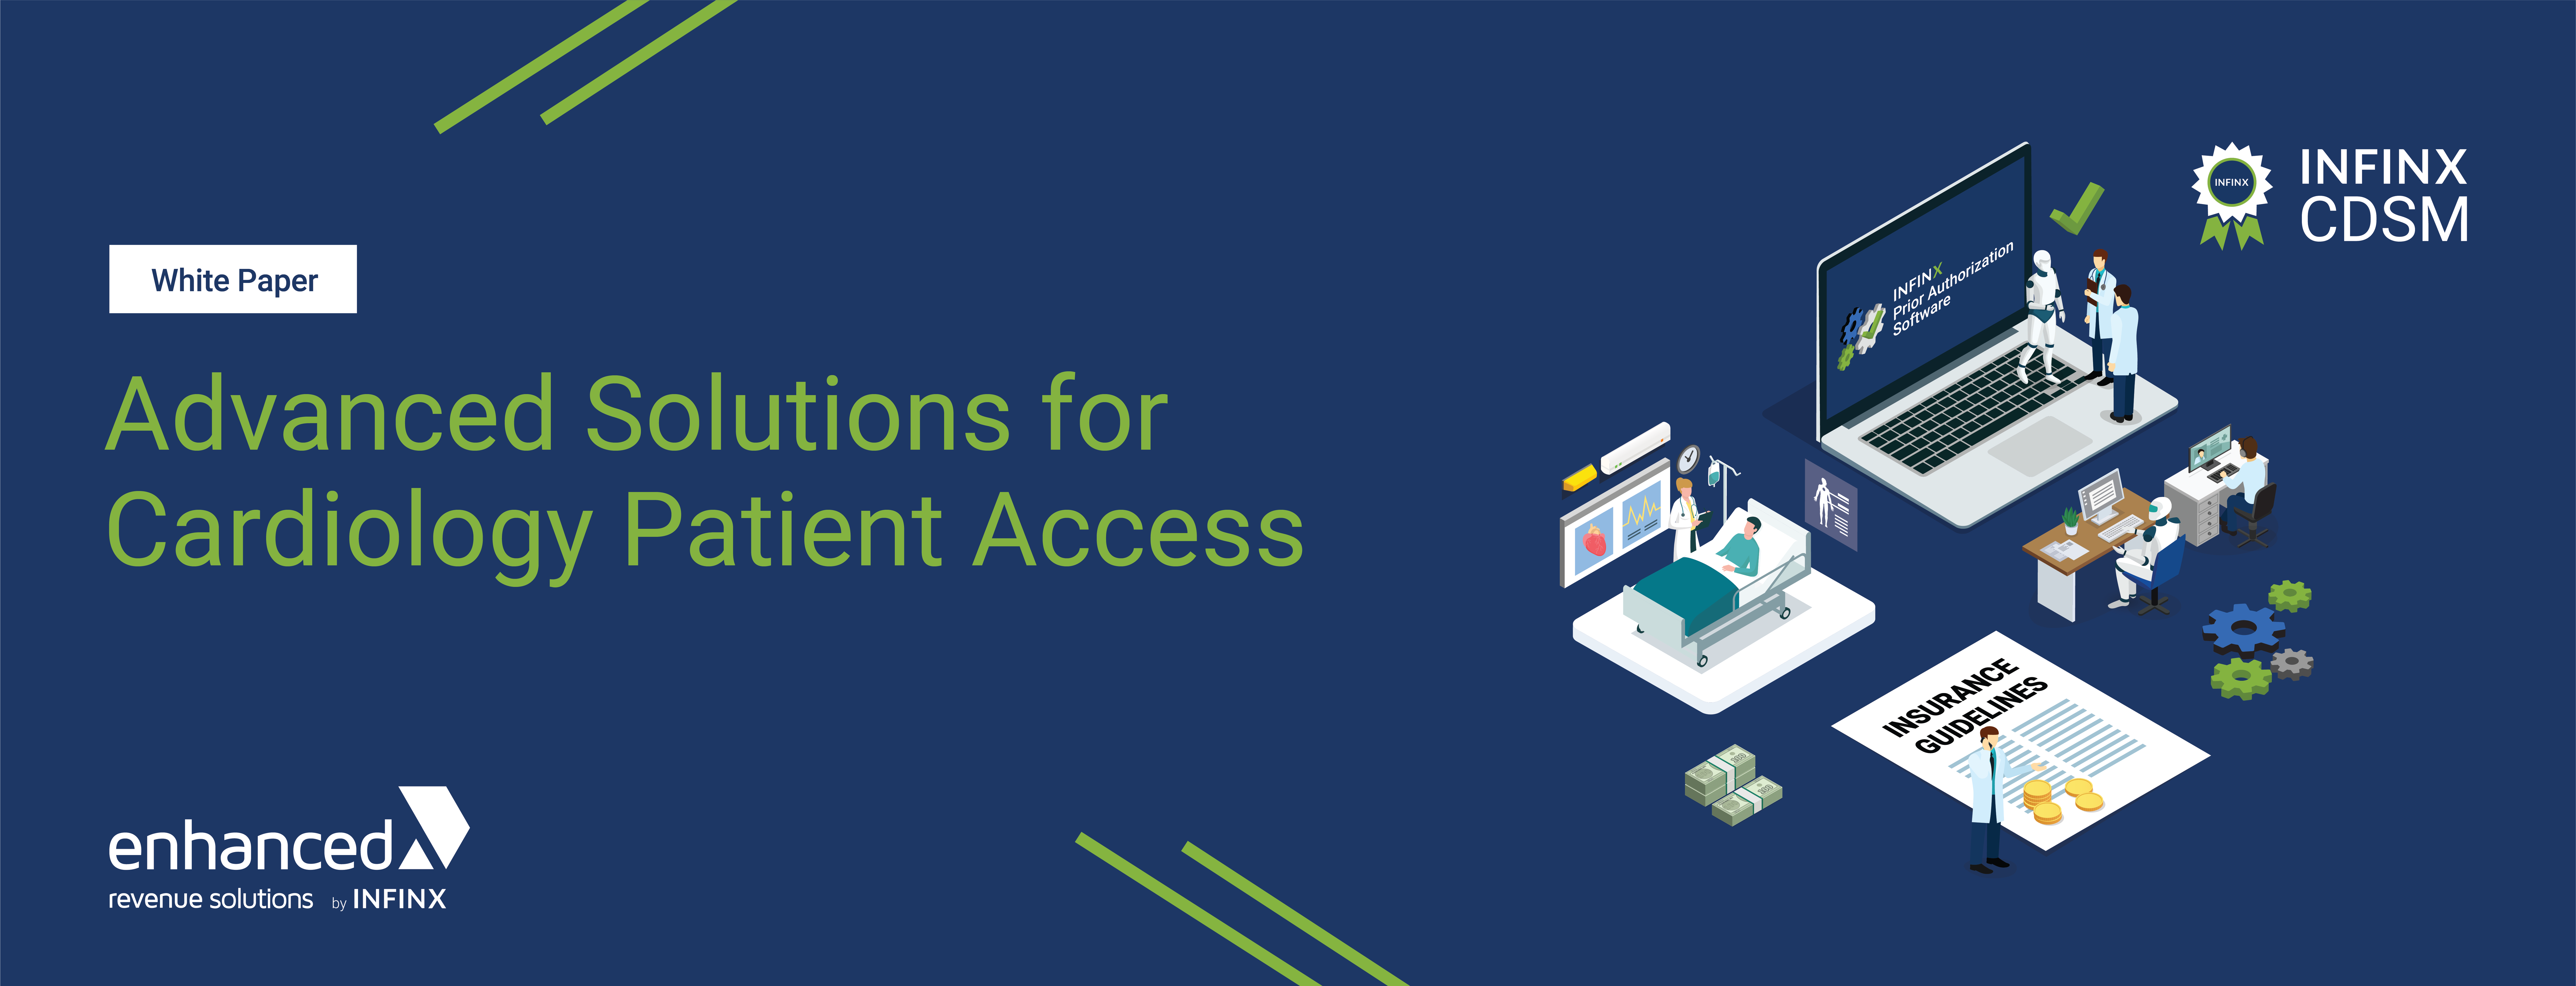 ERS by Infinx - White Paper - Advanced Solutions for Cardiology Patient Access - Banner - June 2020